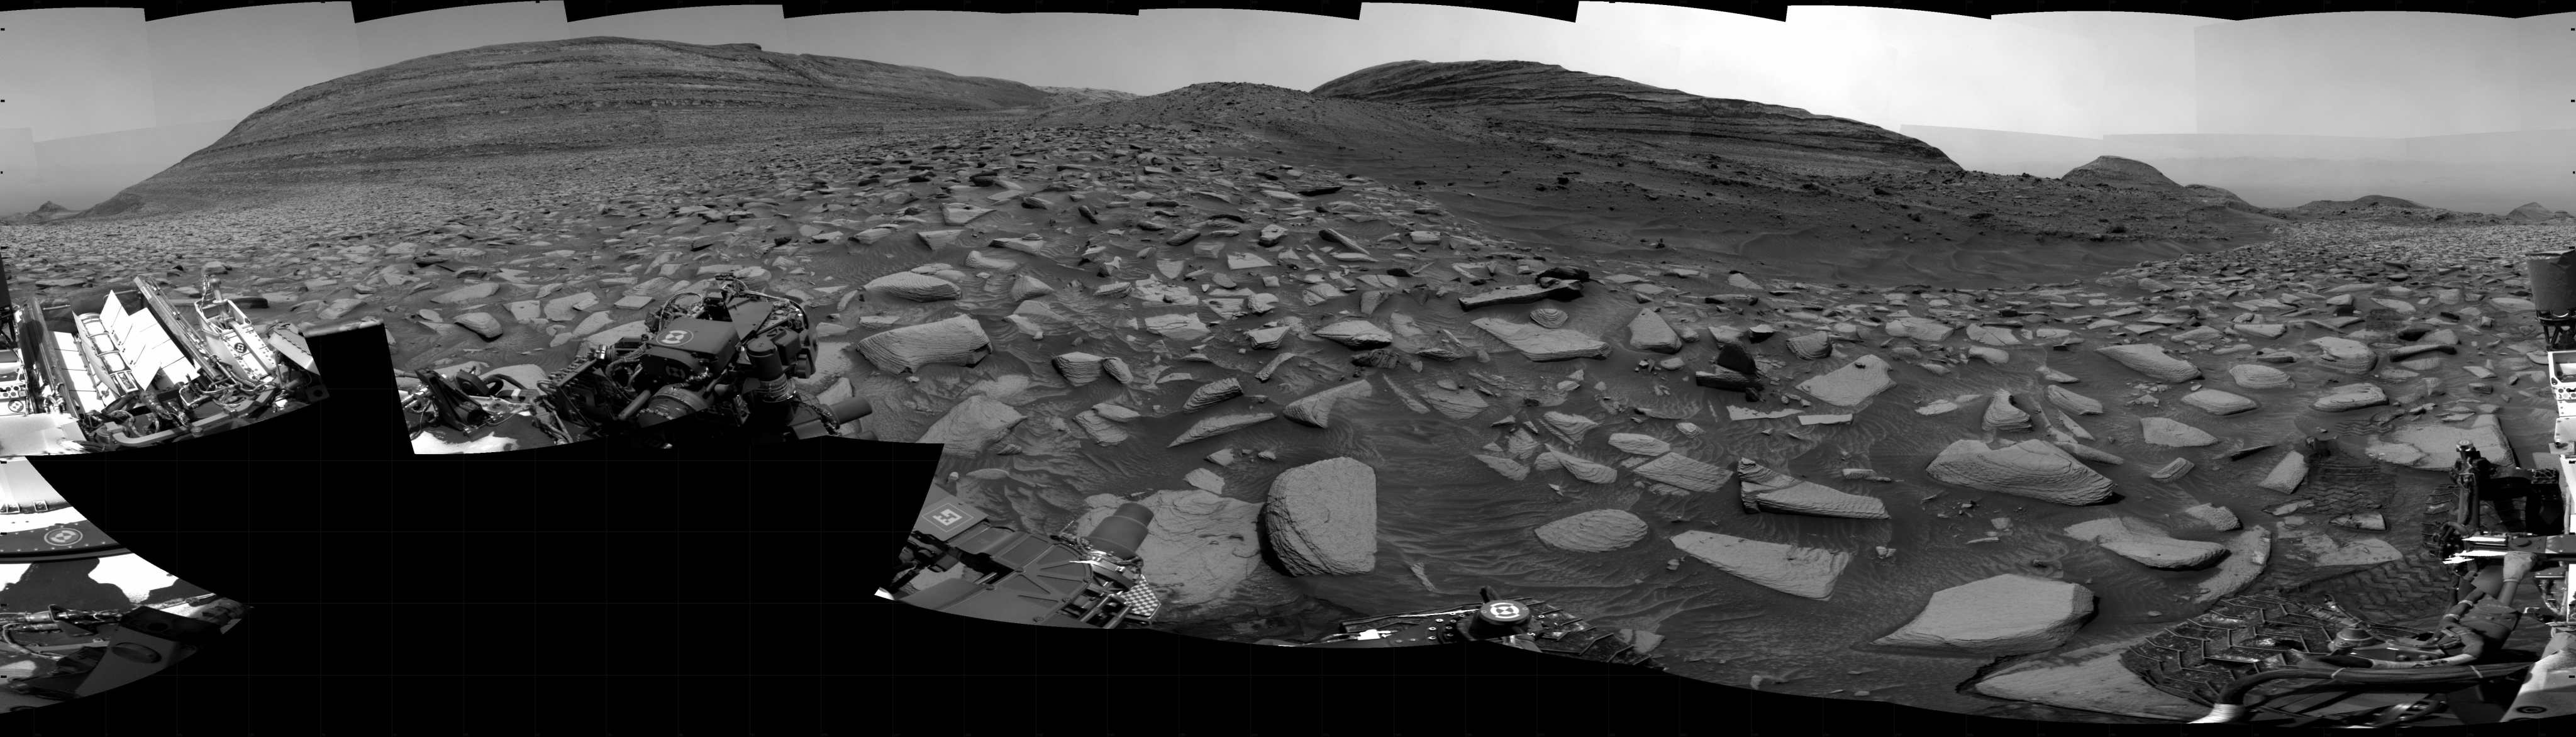 Curiosity took the images on April 17, 2024, Sol 4158 of the Mars Science Laboratory mission at drive 2596, site number 106. The local mean solar time for the image exposures was 1 PM.